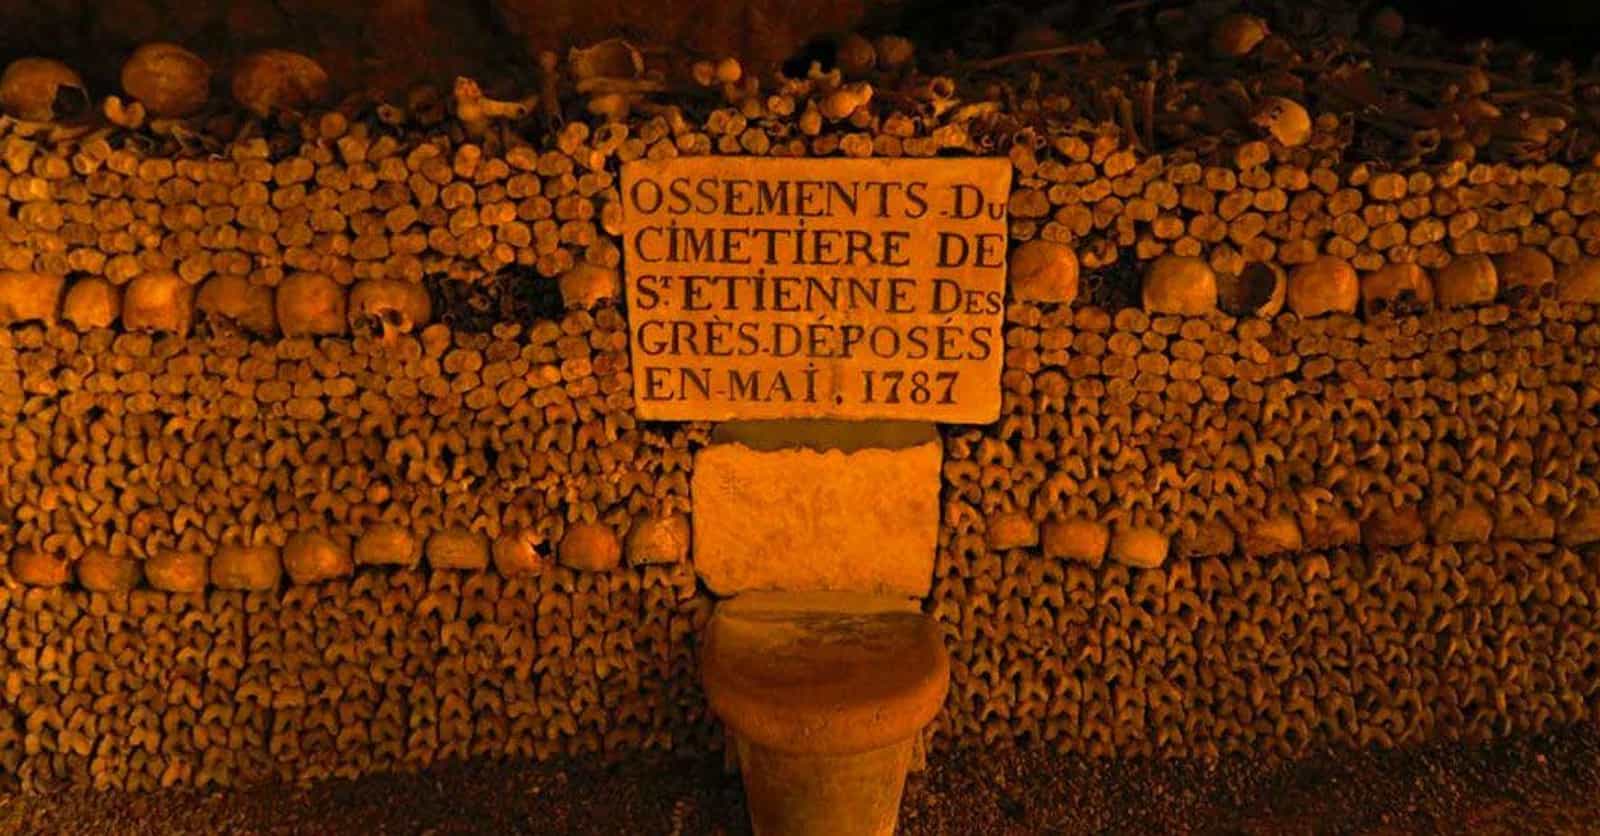 The Paris Catacombs Hide A Secret Cinema Club And Pools, In Addition To Six Million Dead